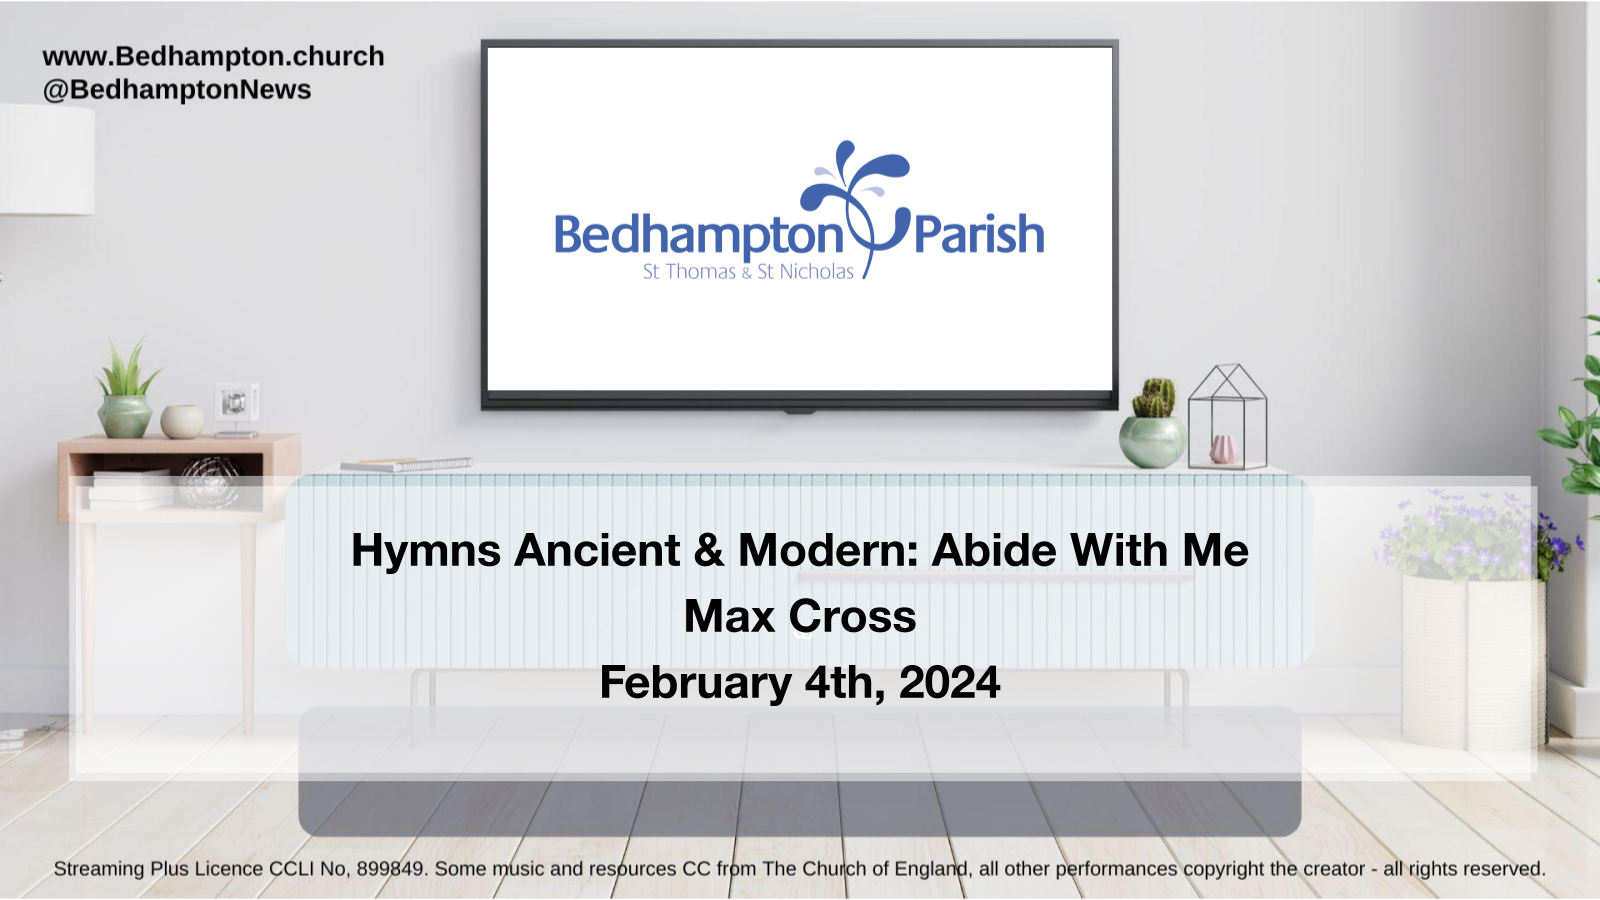 Sermon February 4th, 2024 – Hymns Ancient & Modern: Abide With Me